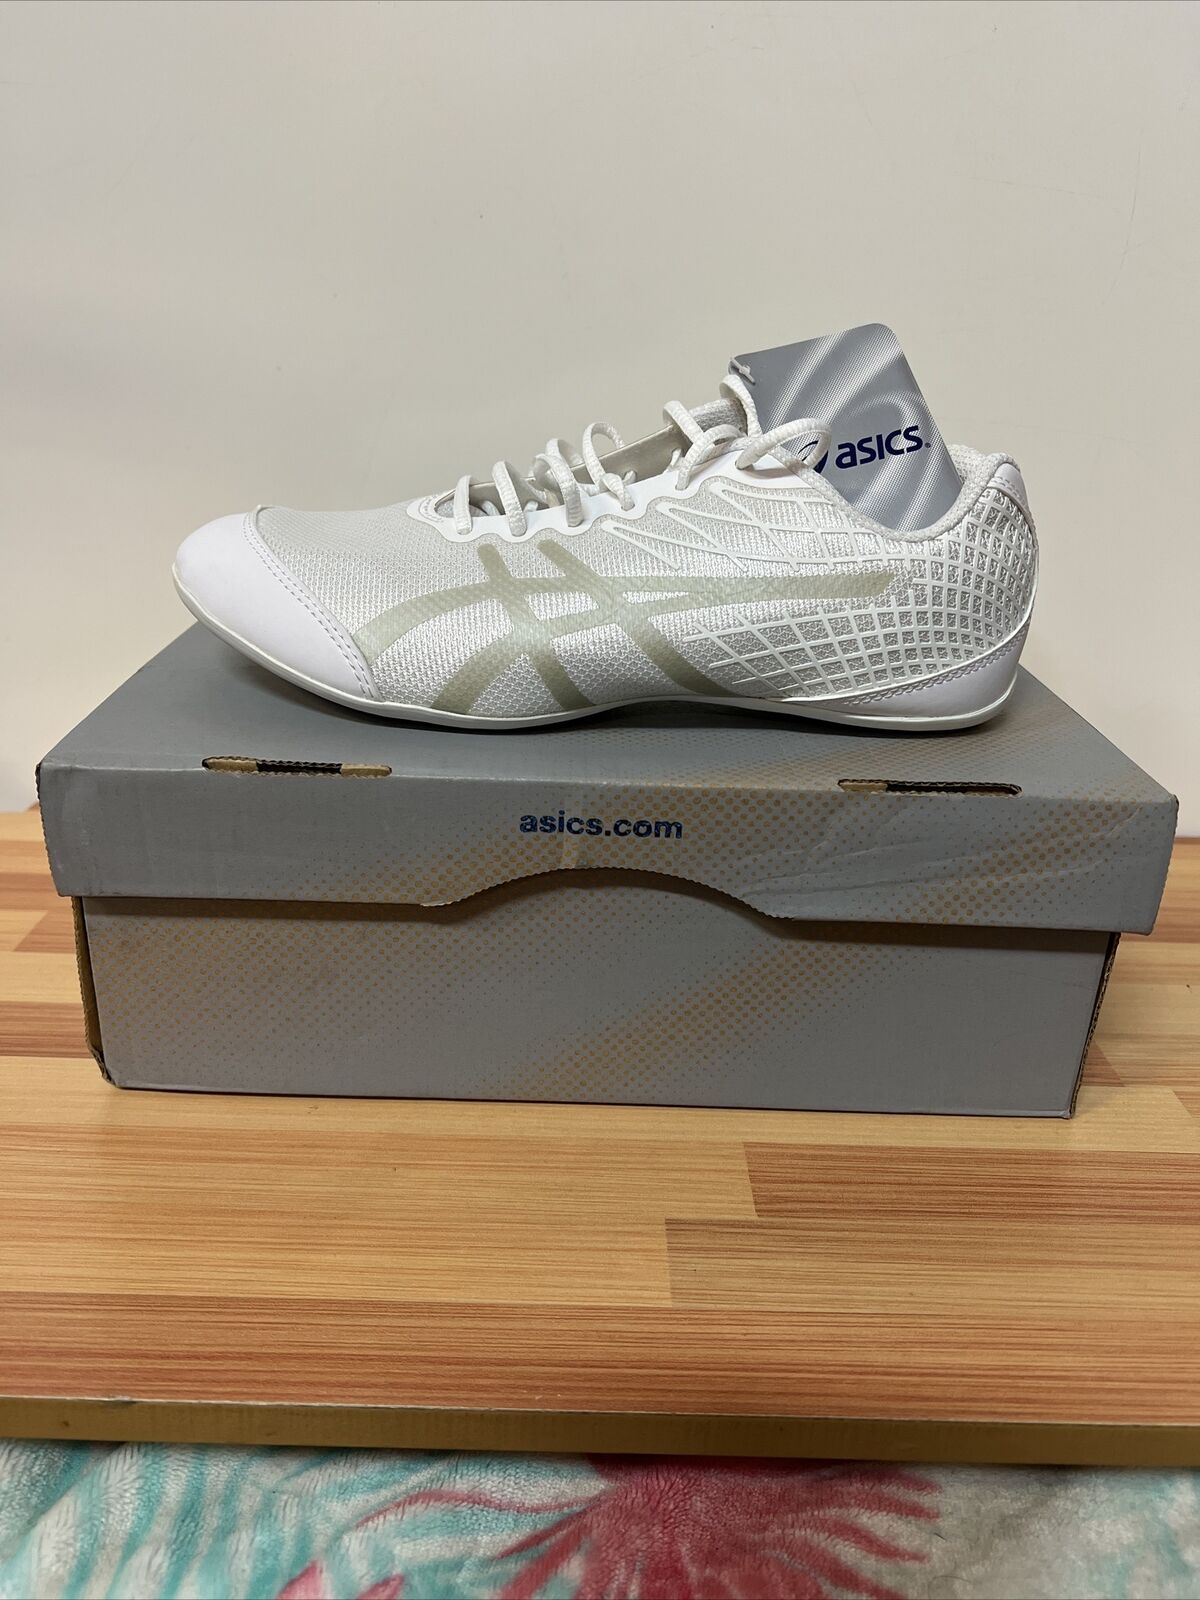 ASICS Ultralyte Cheer 2 Shoes White / Silver Q559N-0193 Women NWT Size 5.5